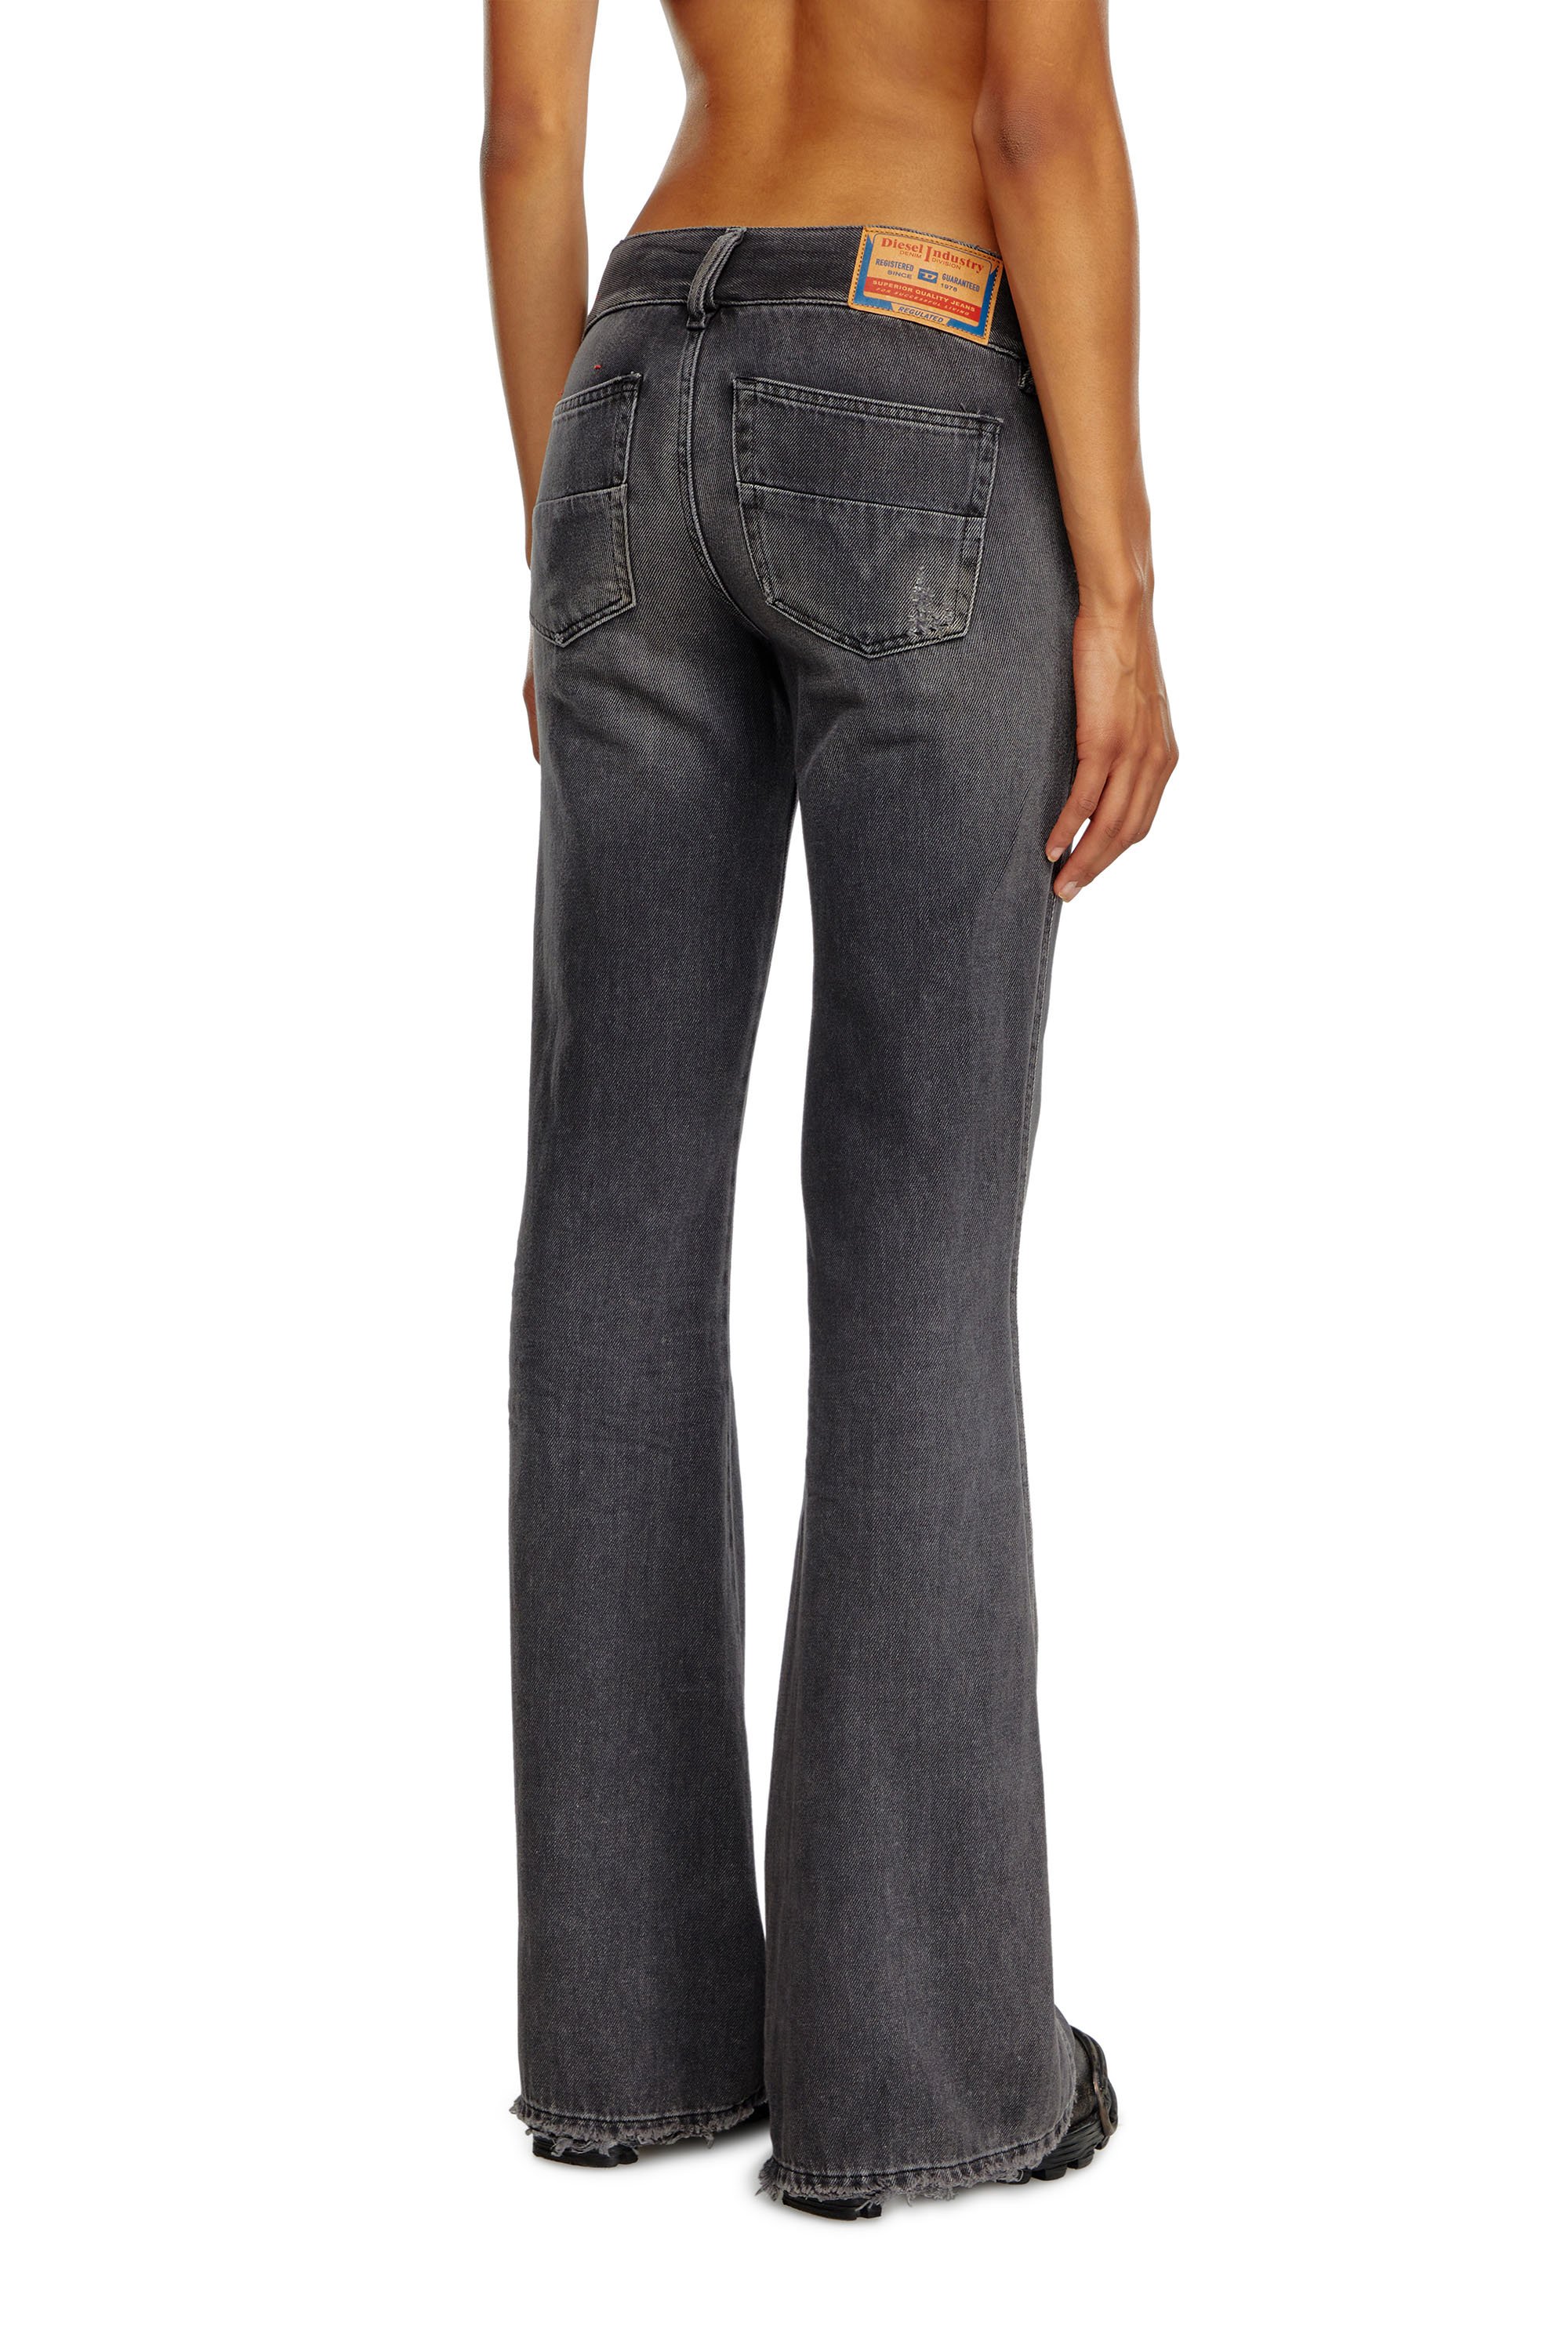 Diesel - Bootcut and Flare Jeans D-Hush 09K14, Mujer Bootcut y Flare Jeans - D-Hush in Negro - Image 3